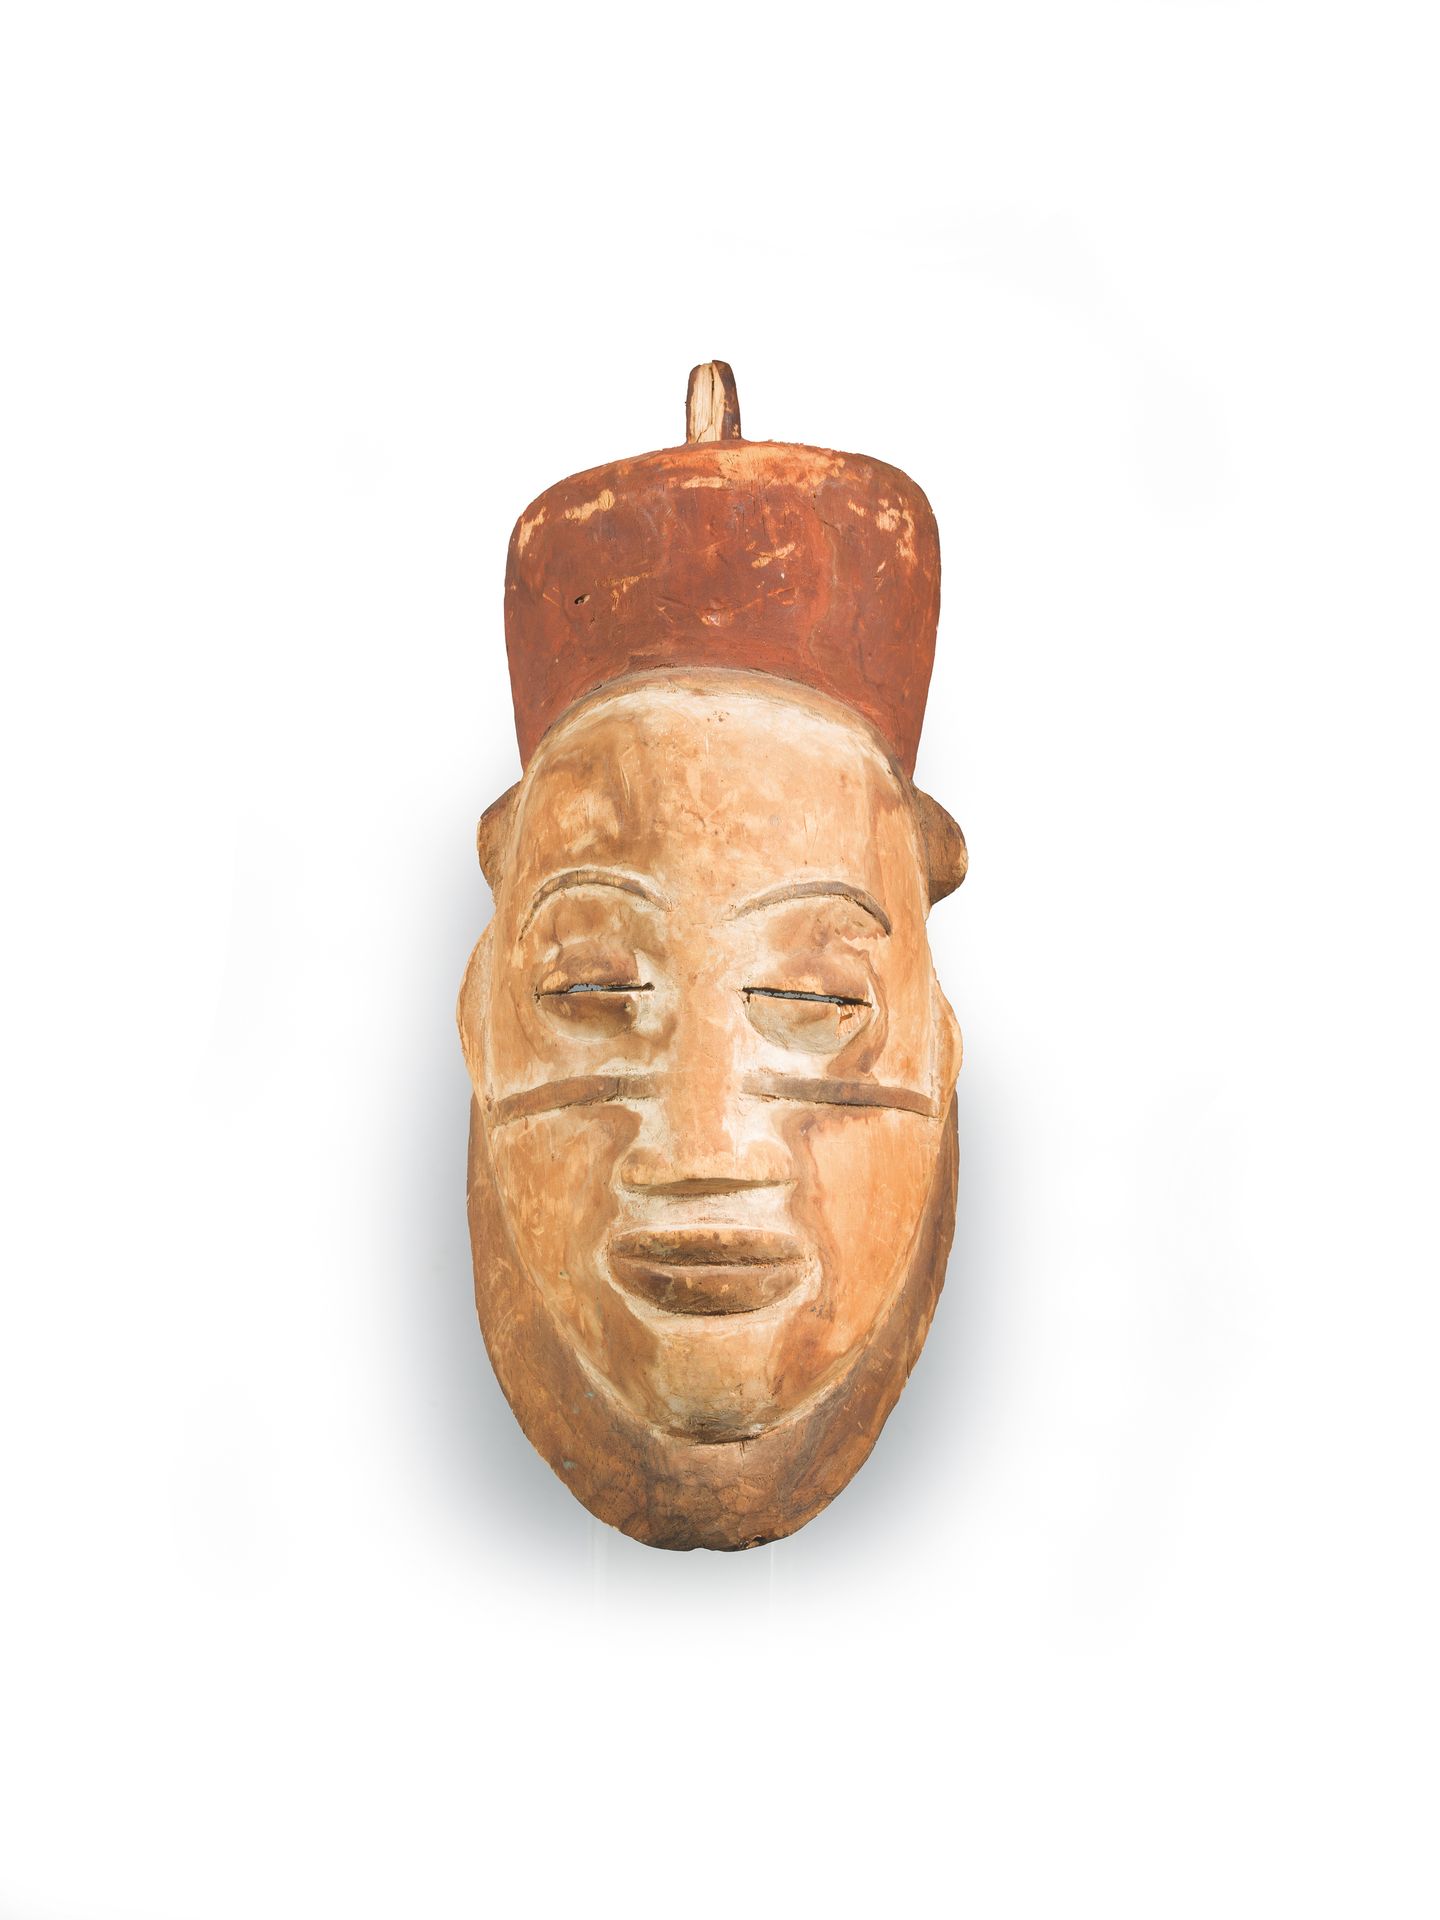 Null PUNU MASK

Gabon 20th century

Wood and pigments

32 x 12.5 cm